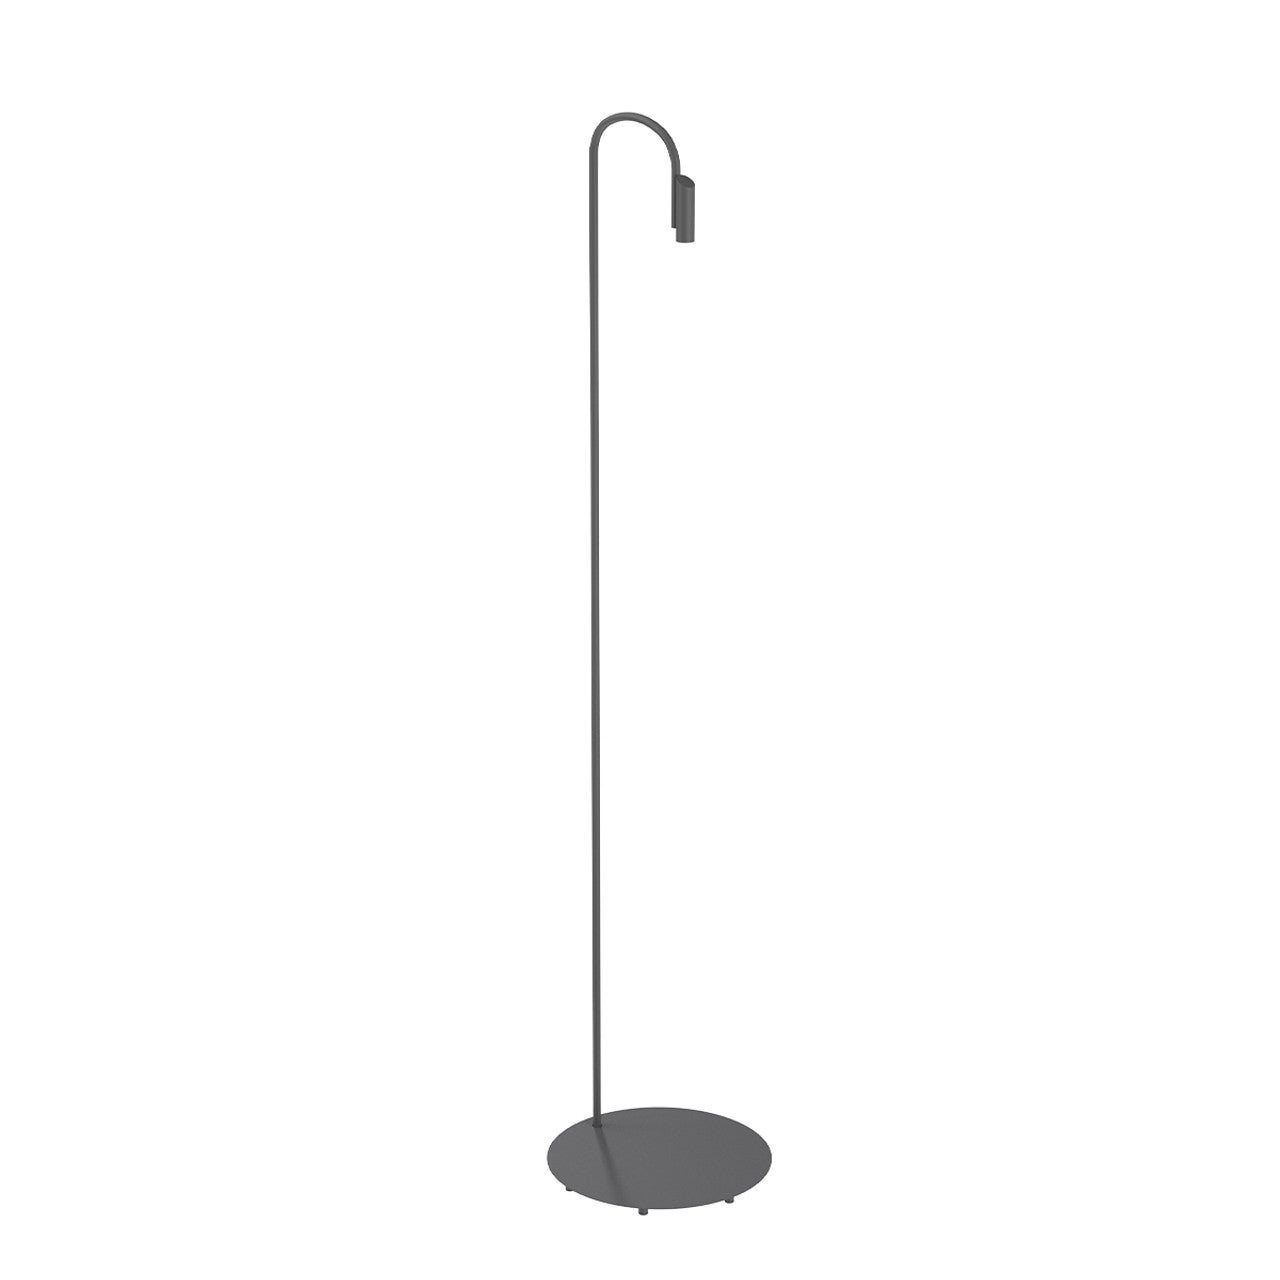 Flos Caule 2700K Model 5 Outdoor Floor Lamp in Anthracite with Regular Shade For Sale